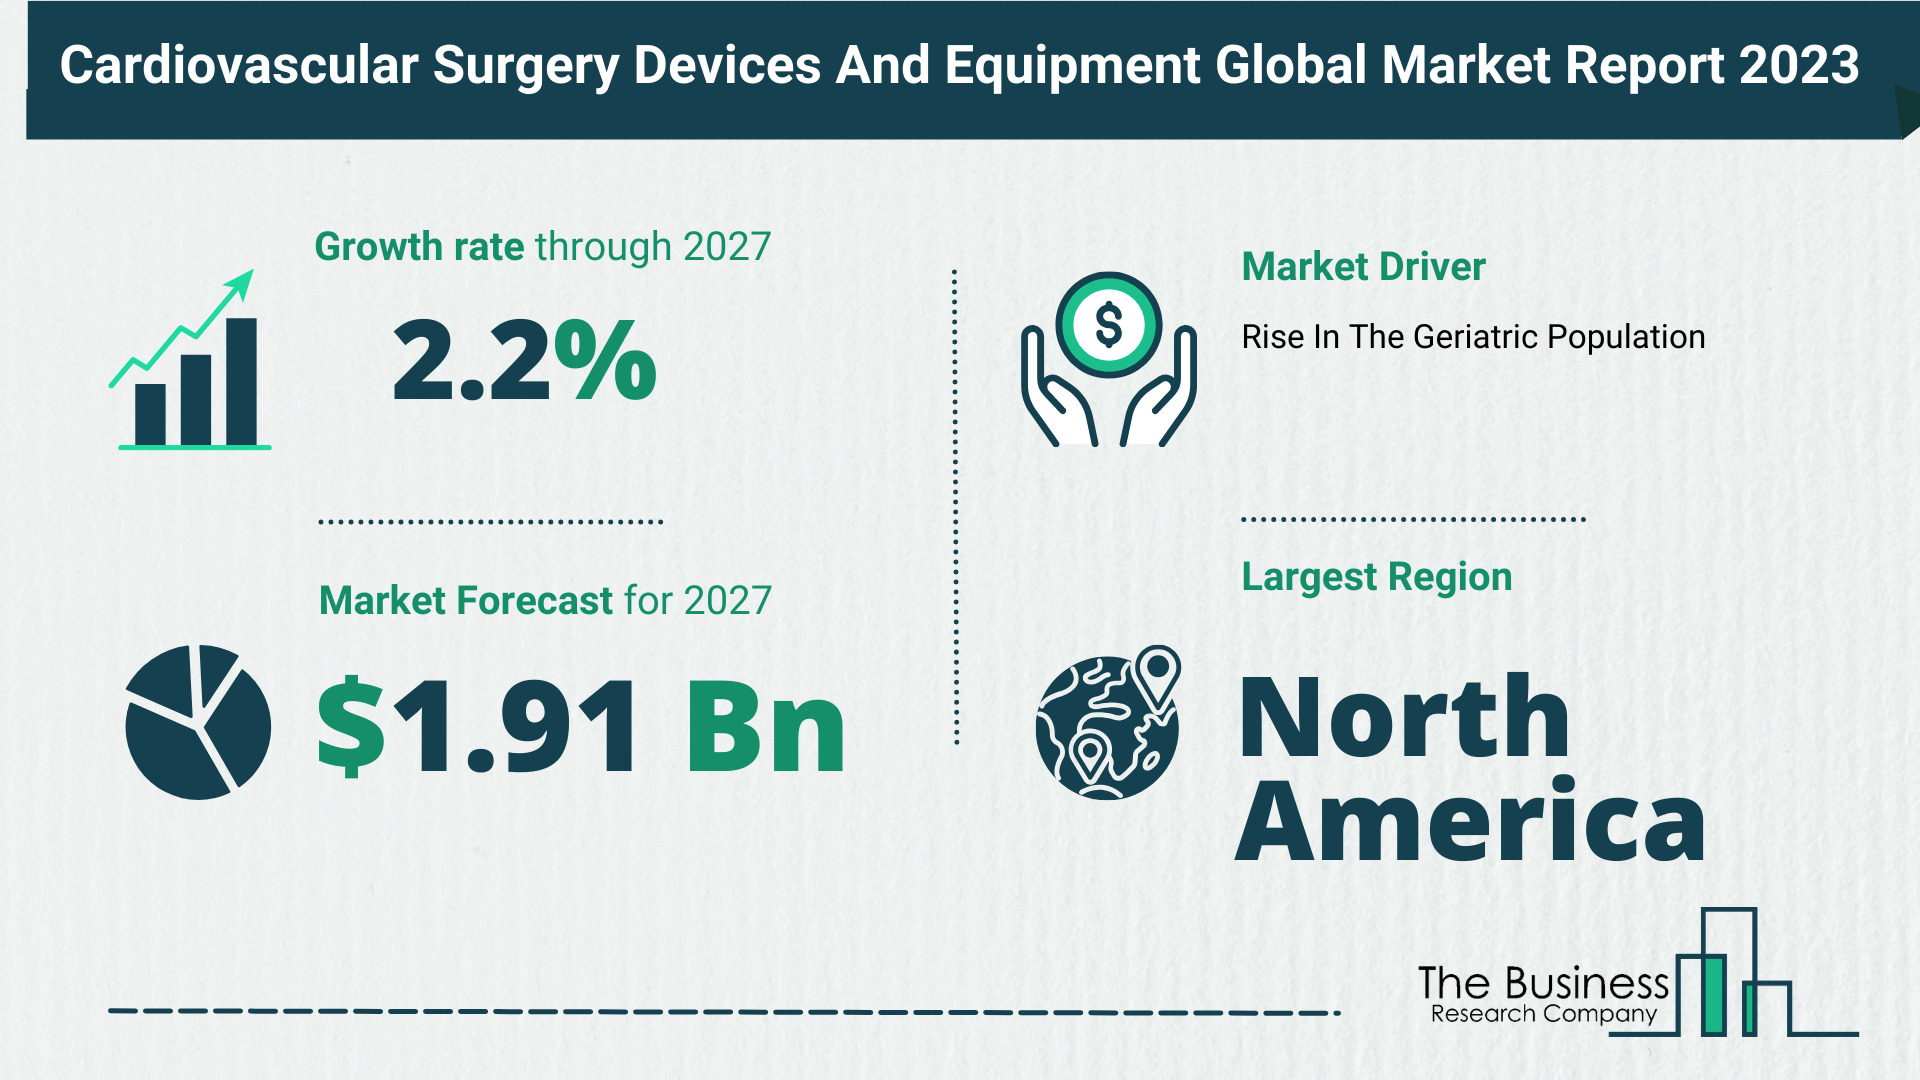 Understand How The Cardiovascular Surgery Devices And Equipment Market Is Poised To Grow Through 2023-2032